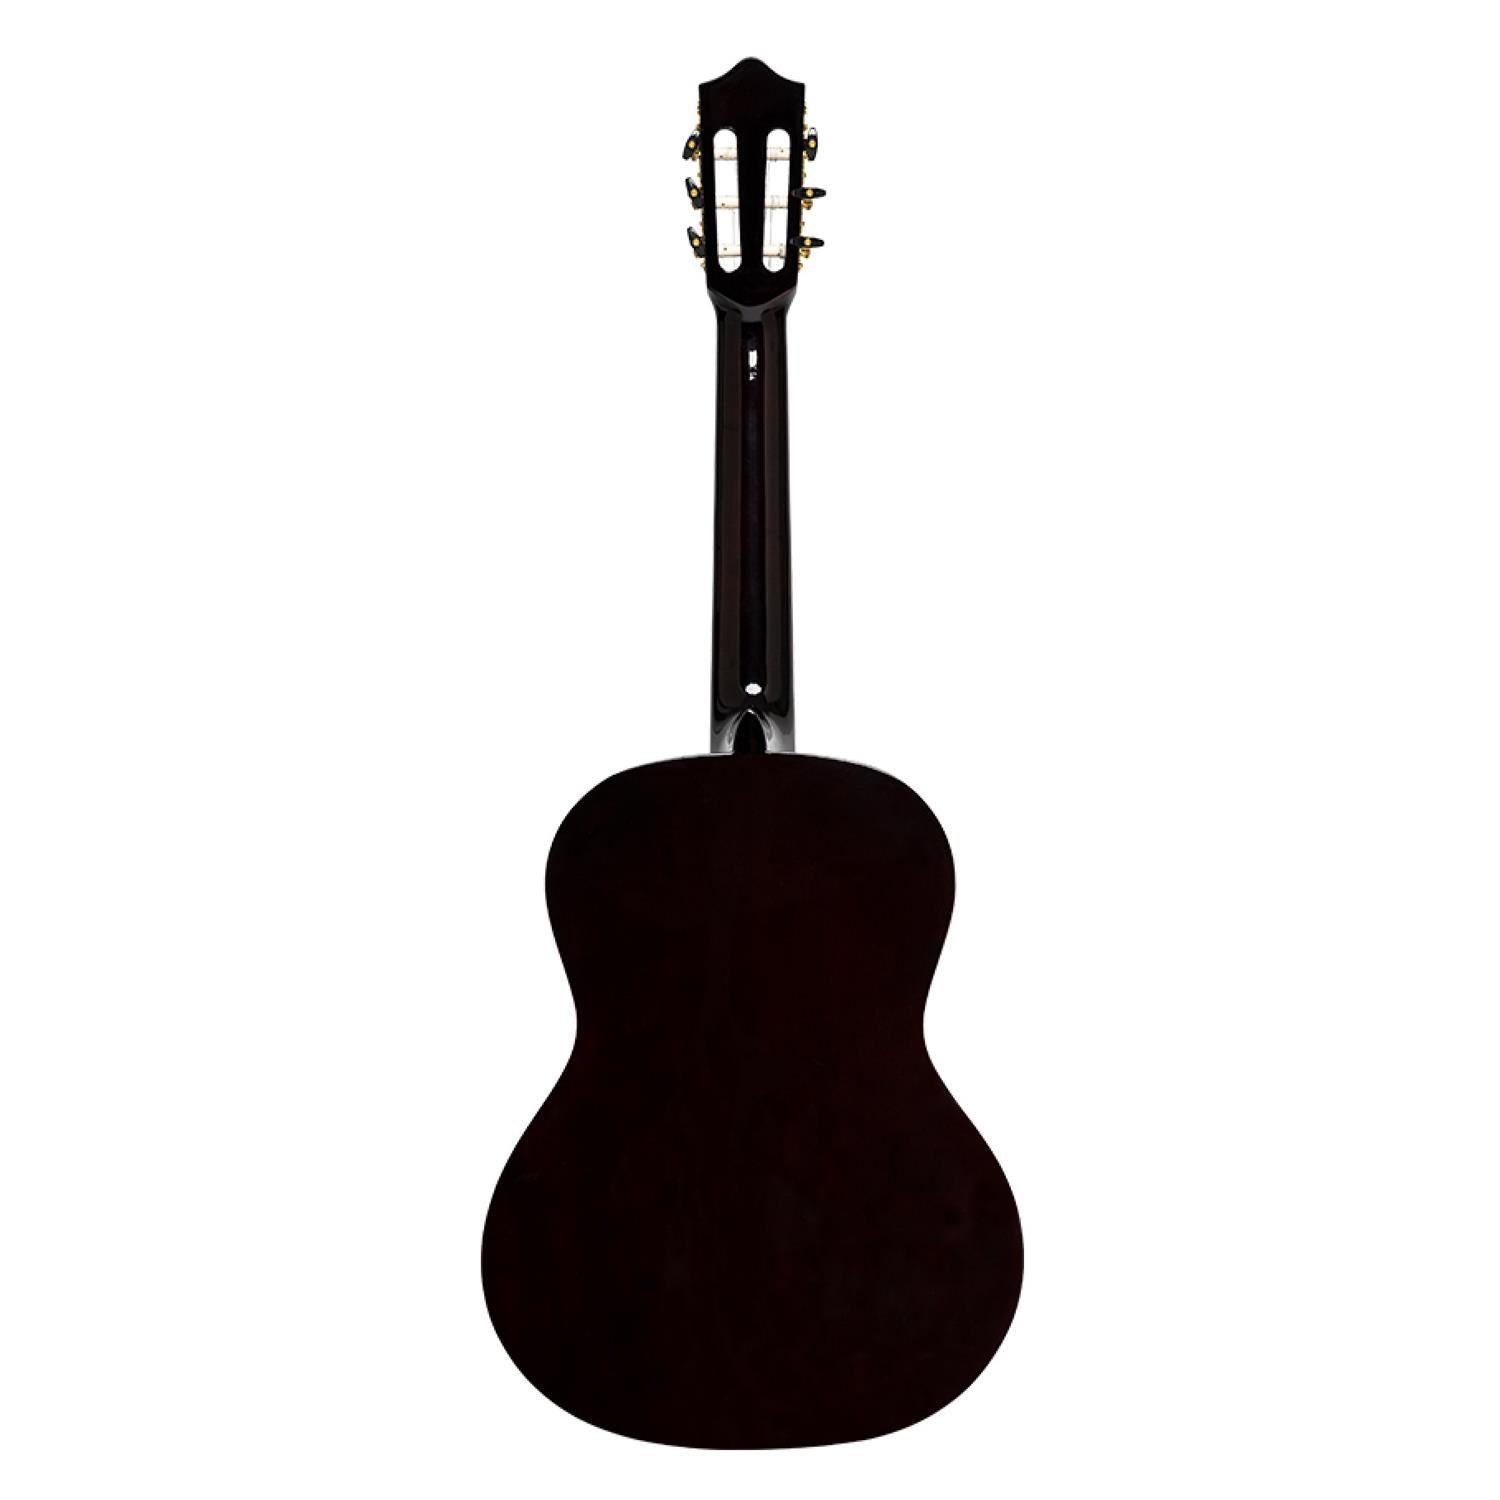 Stagg SCL60-NAT Classical Guitar with spruce top - DY Pro Audio